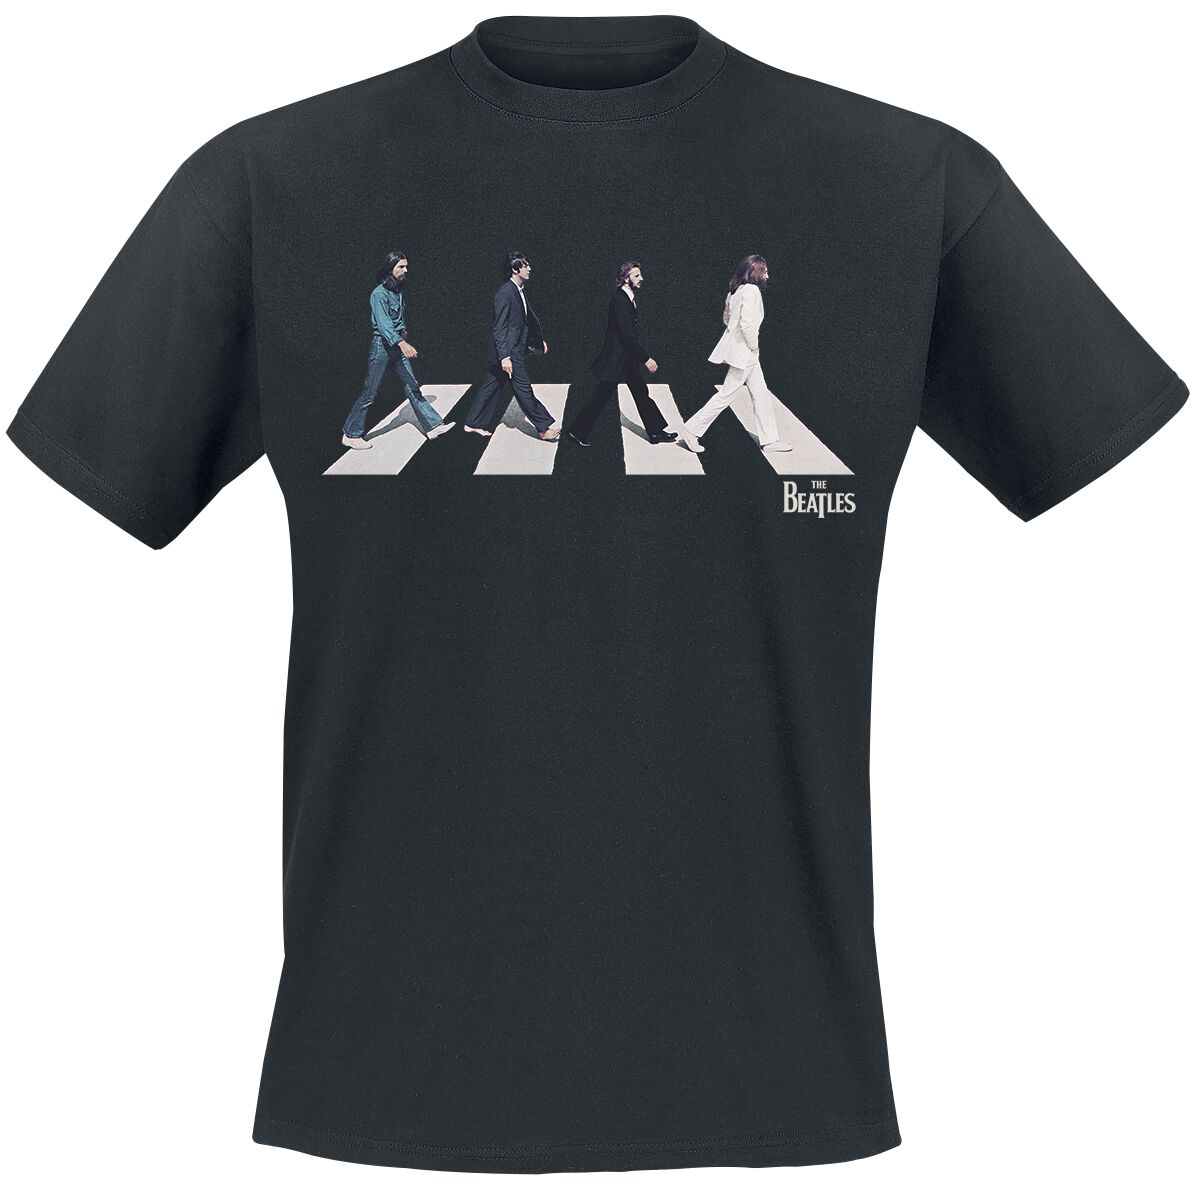 Image of T-Shirt di The Beatles - Abbey Road Silhouette - S a 3XL - Uomo - nero